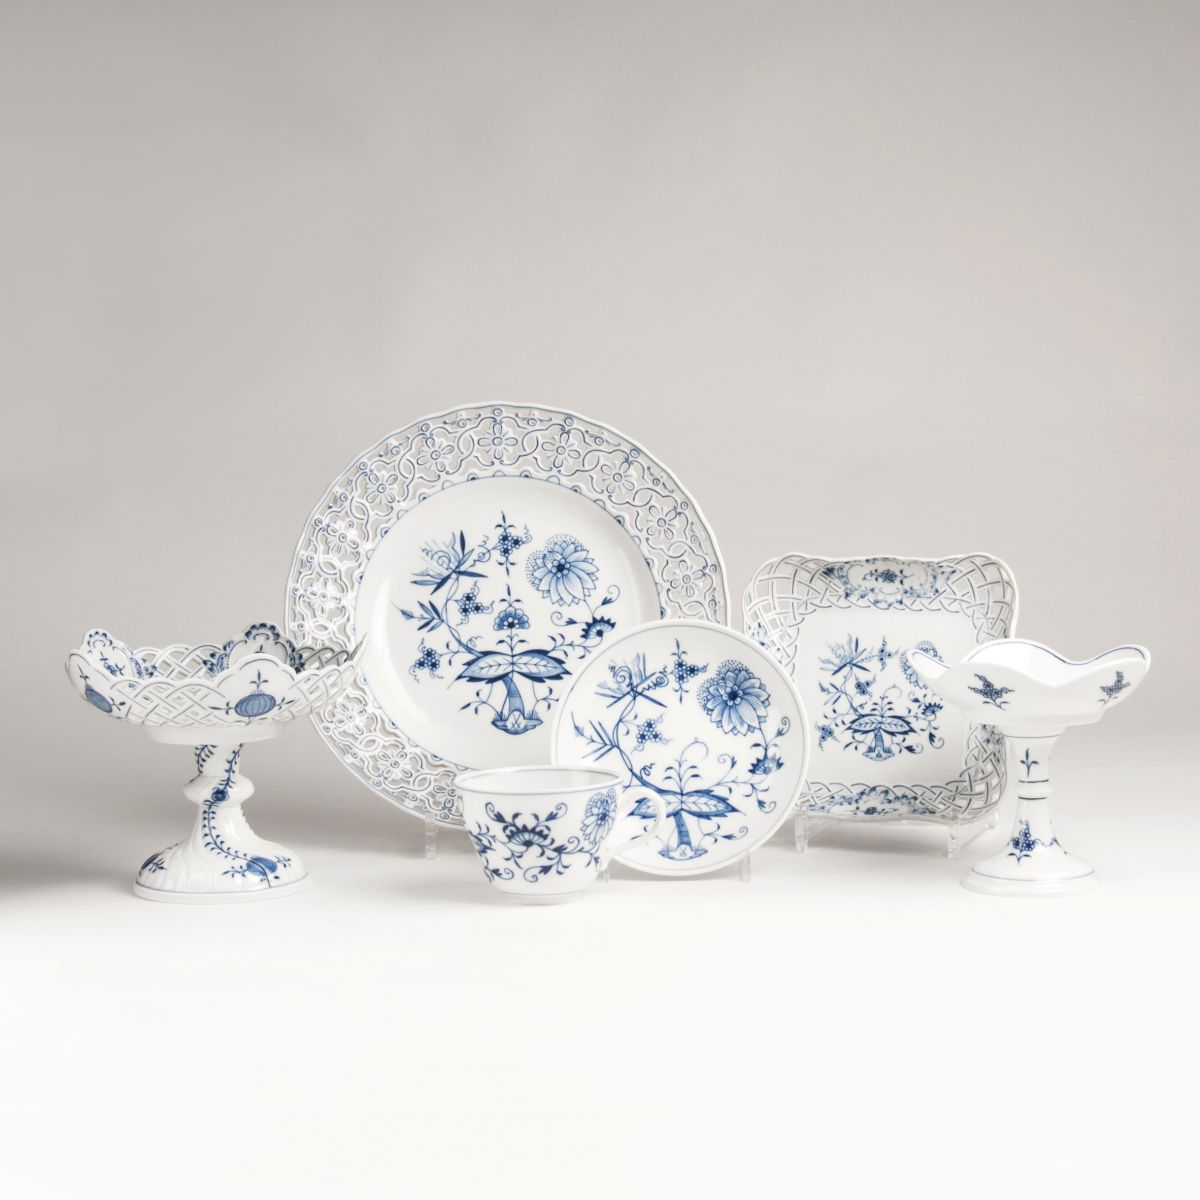 A set of pieces with onion pattern